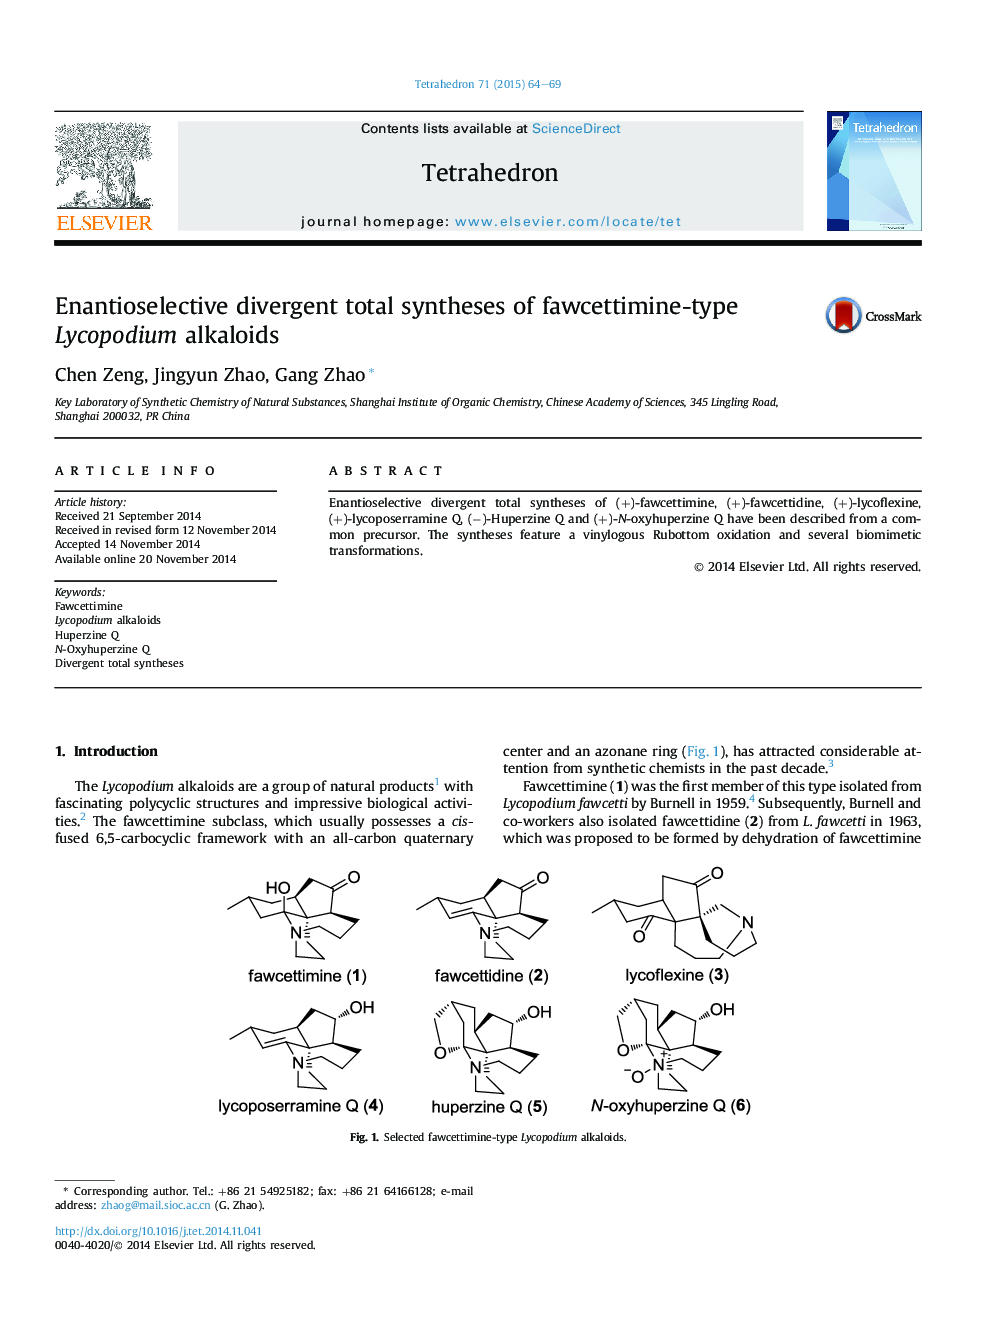 Enantioselective divergent total syntheses of fawcettimine-type Lycopodium alkaloids